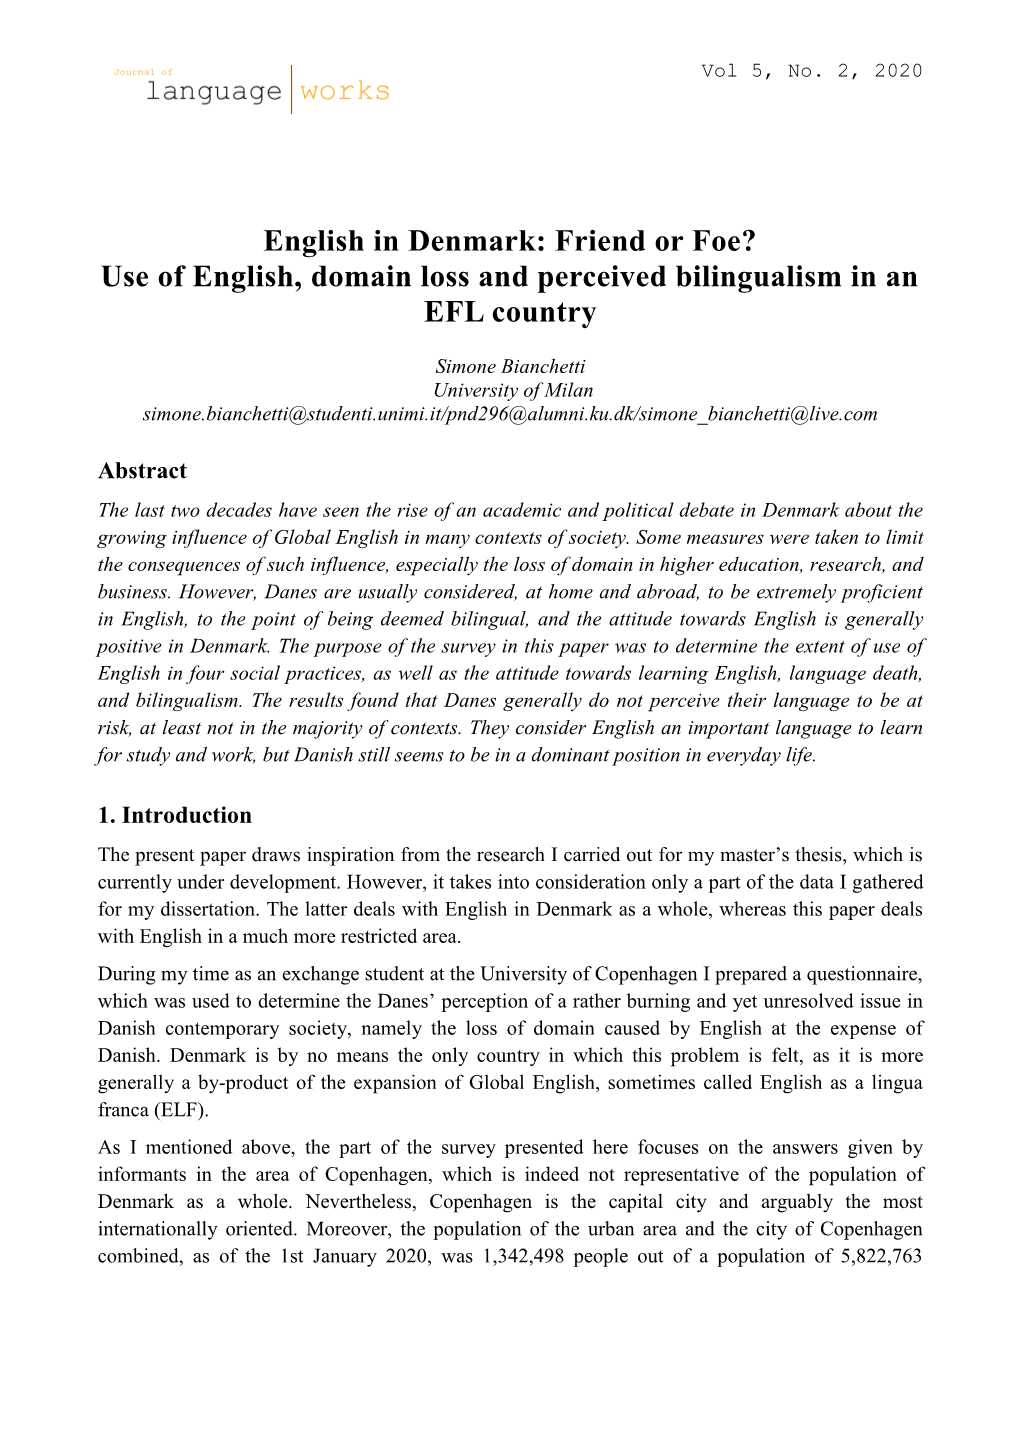 English in Denmark: Friend Or Foe? Use of English, Domain Loss and Perceived Bilingualism in an EFL Country